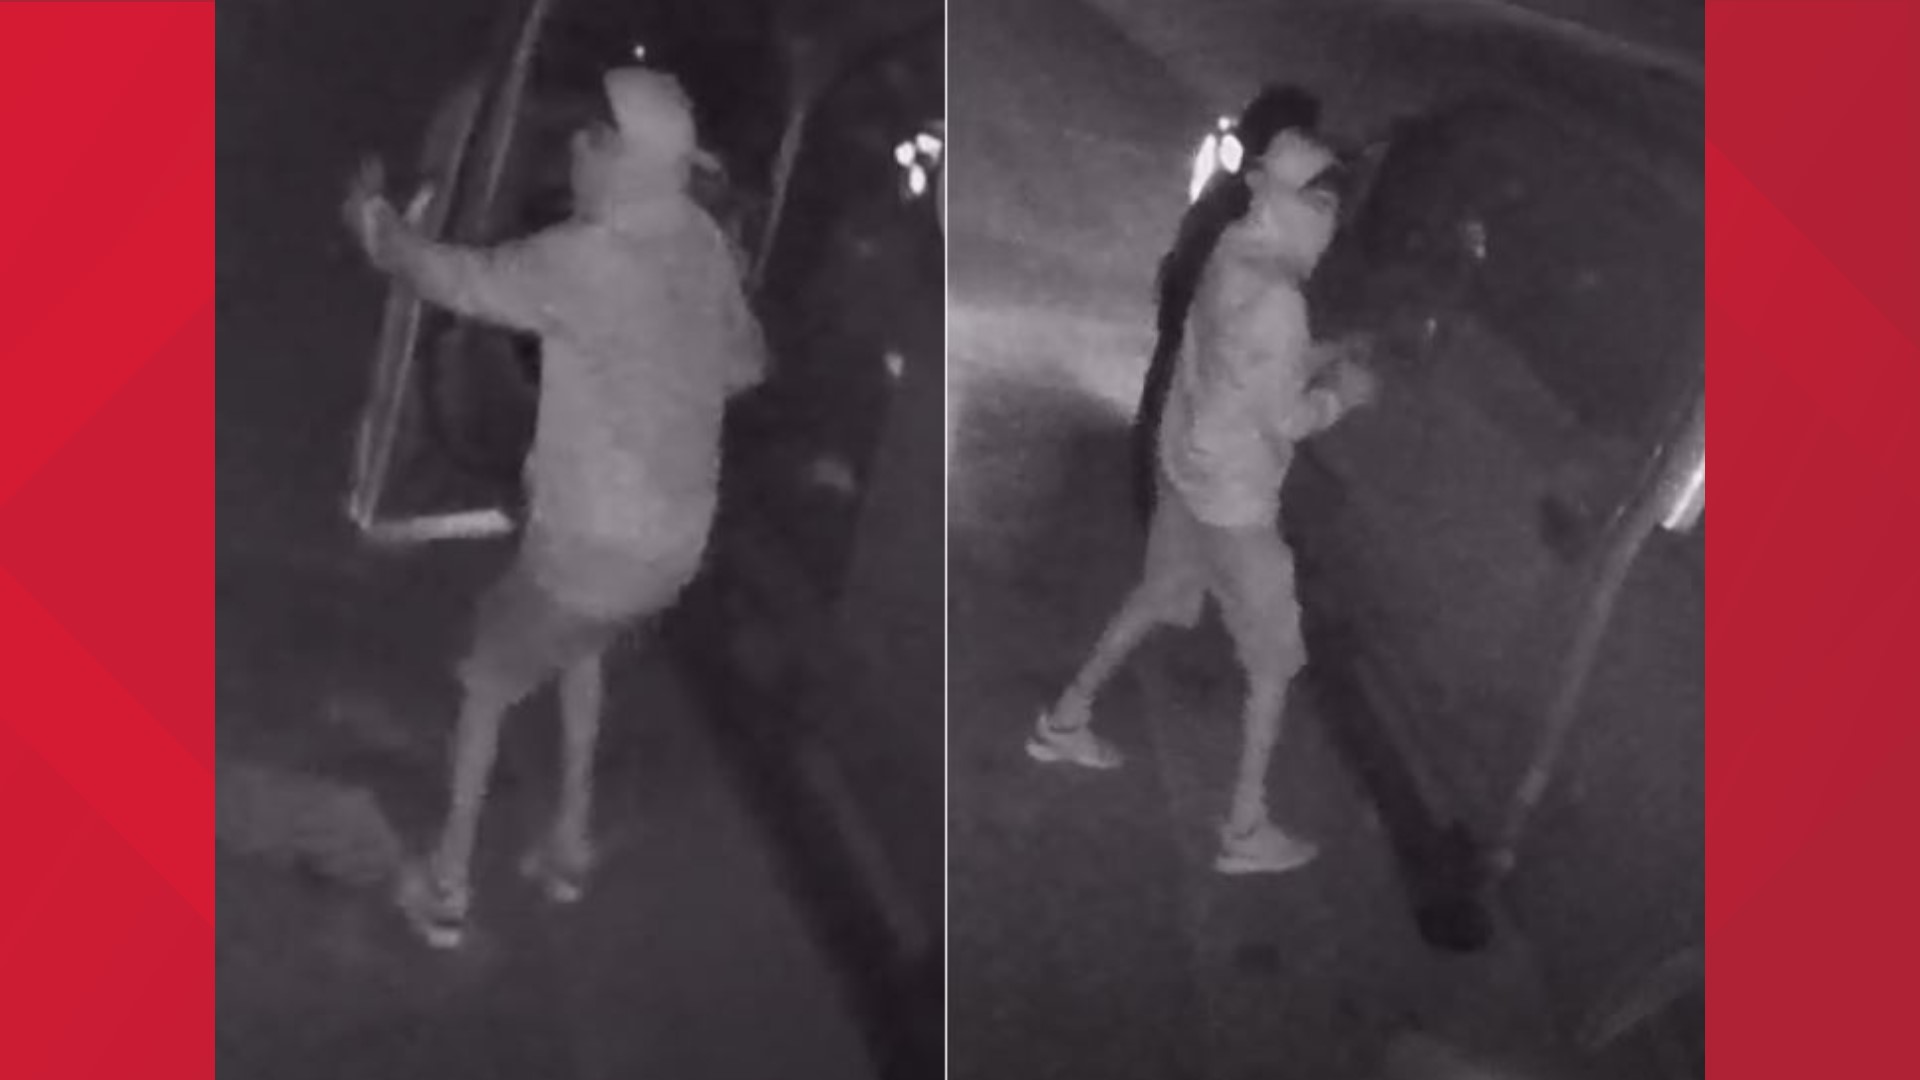 The department said it received several burglary reports over the weekend, with one suspect caught on camera.